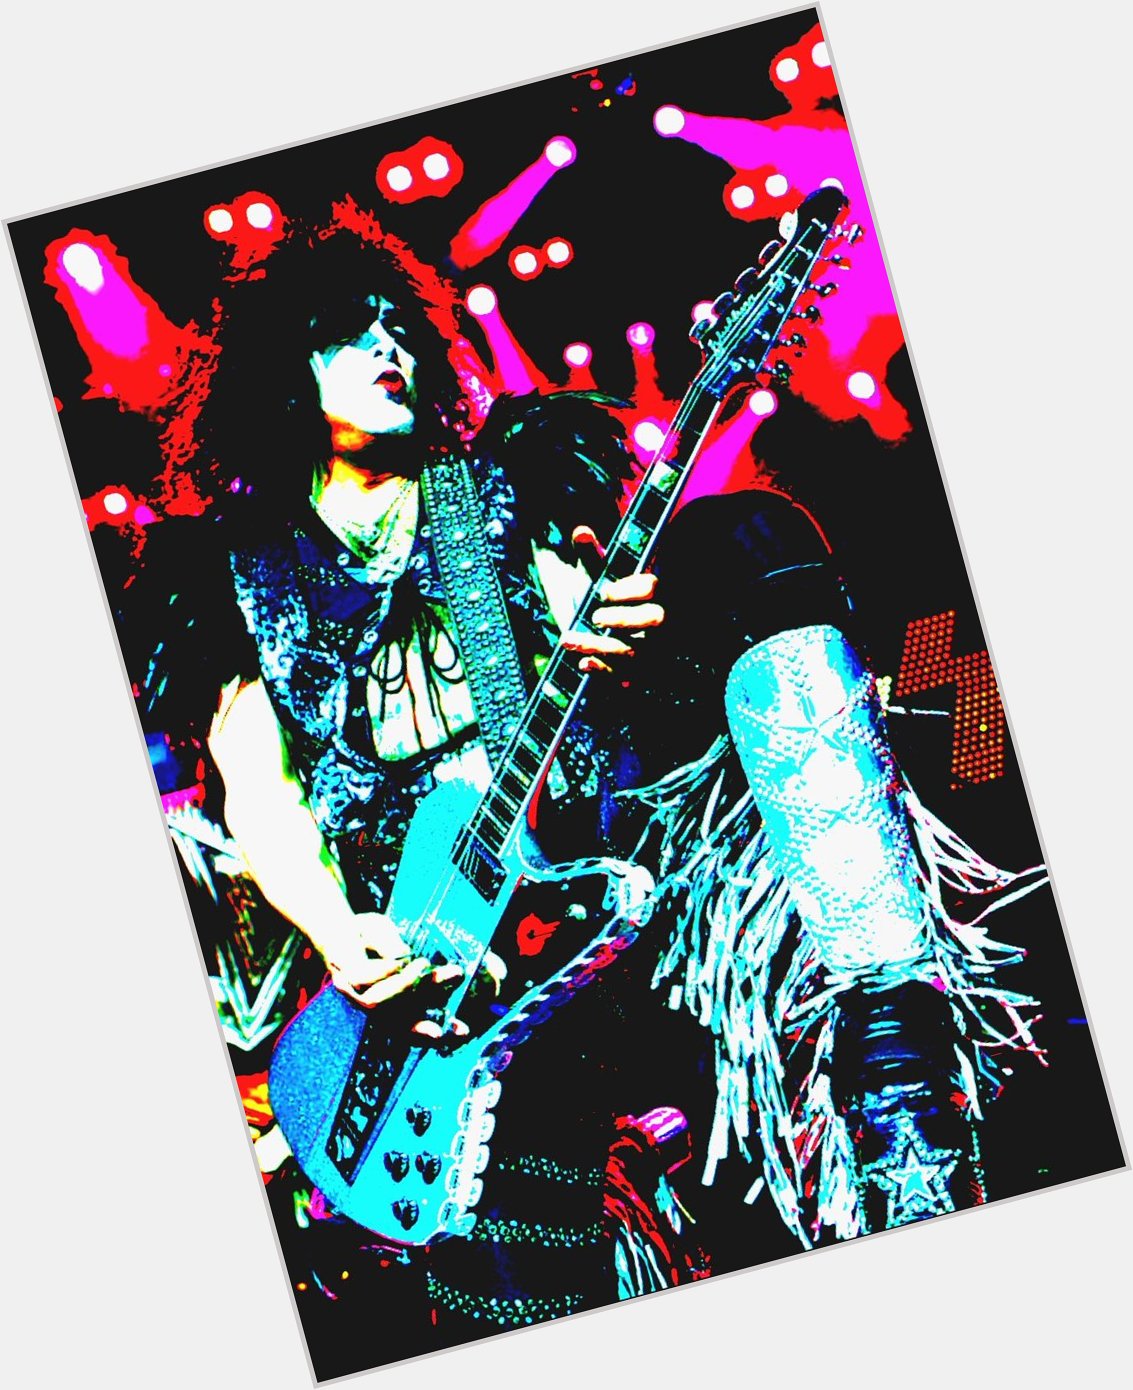  Happy Birthday dear Paul Stanley !!!
I was made for loving you & 